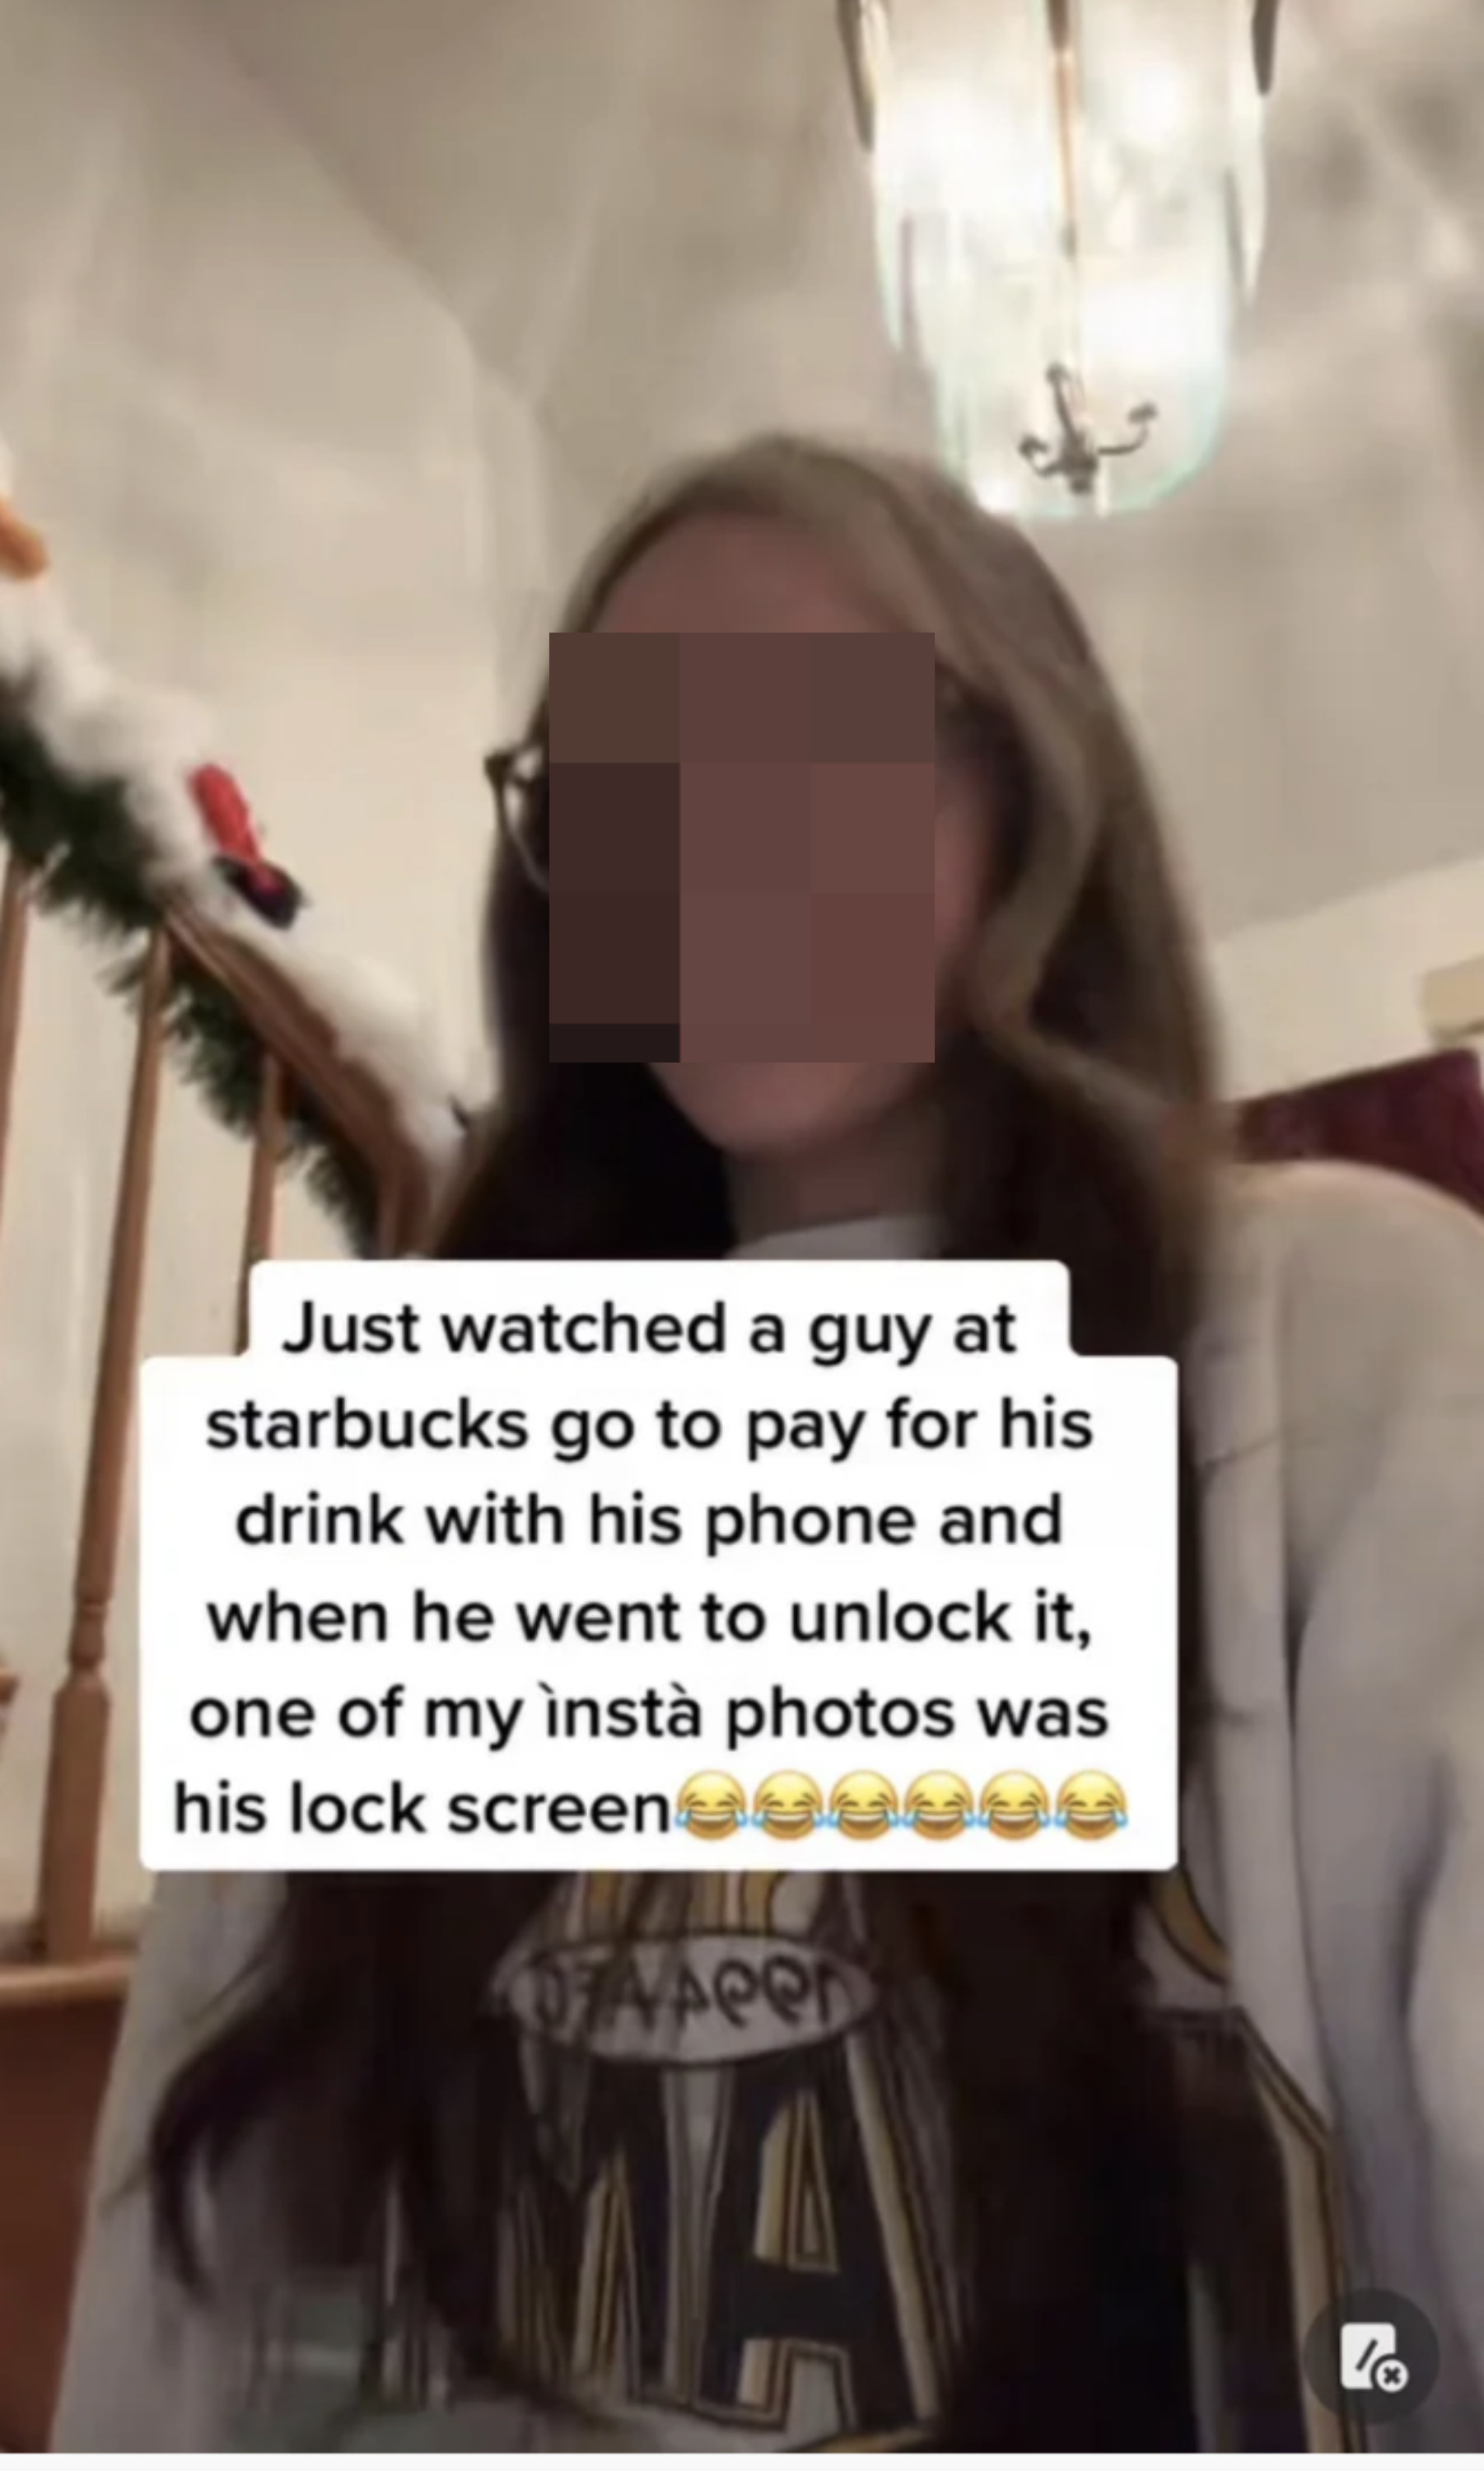 woman saying that when a guy nearby unlocked his phone a photo from her instagram was the lockscreen